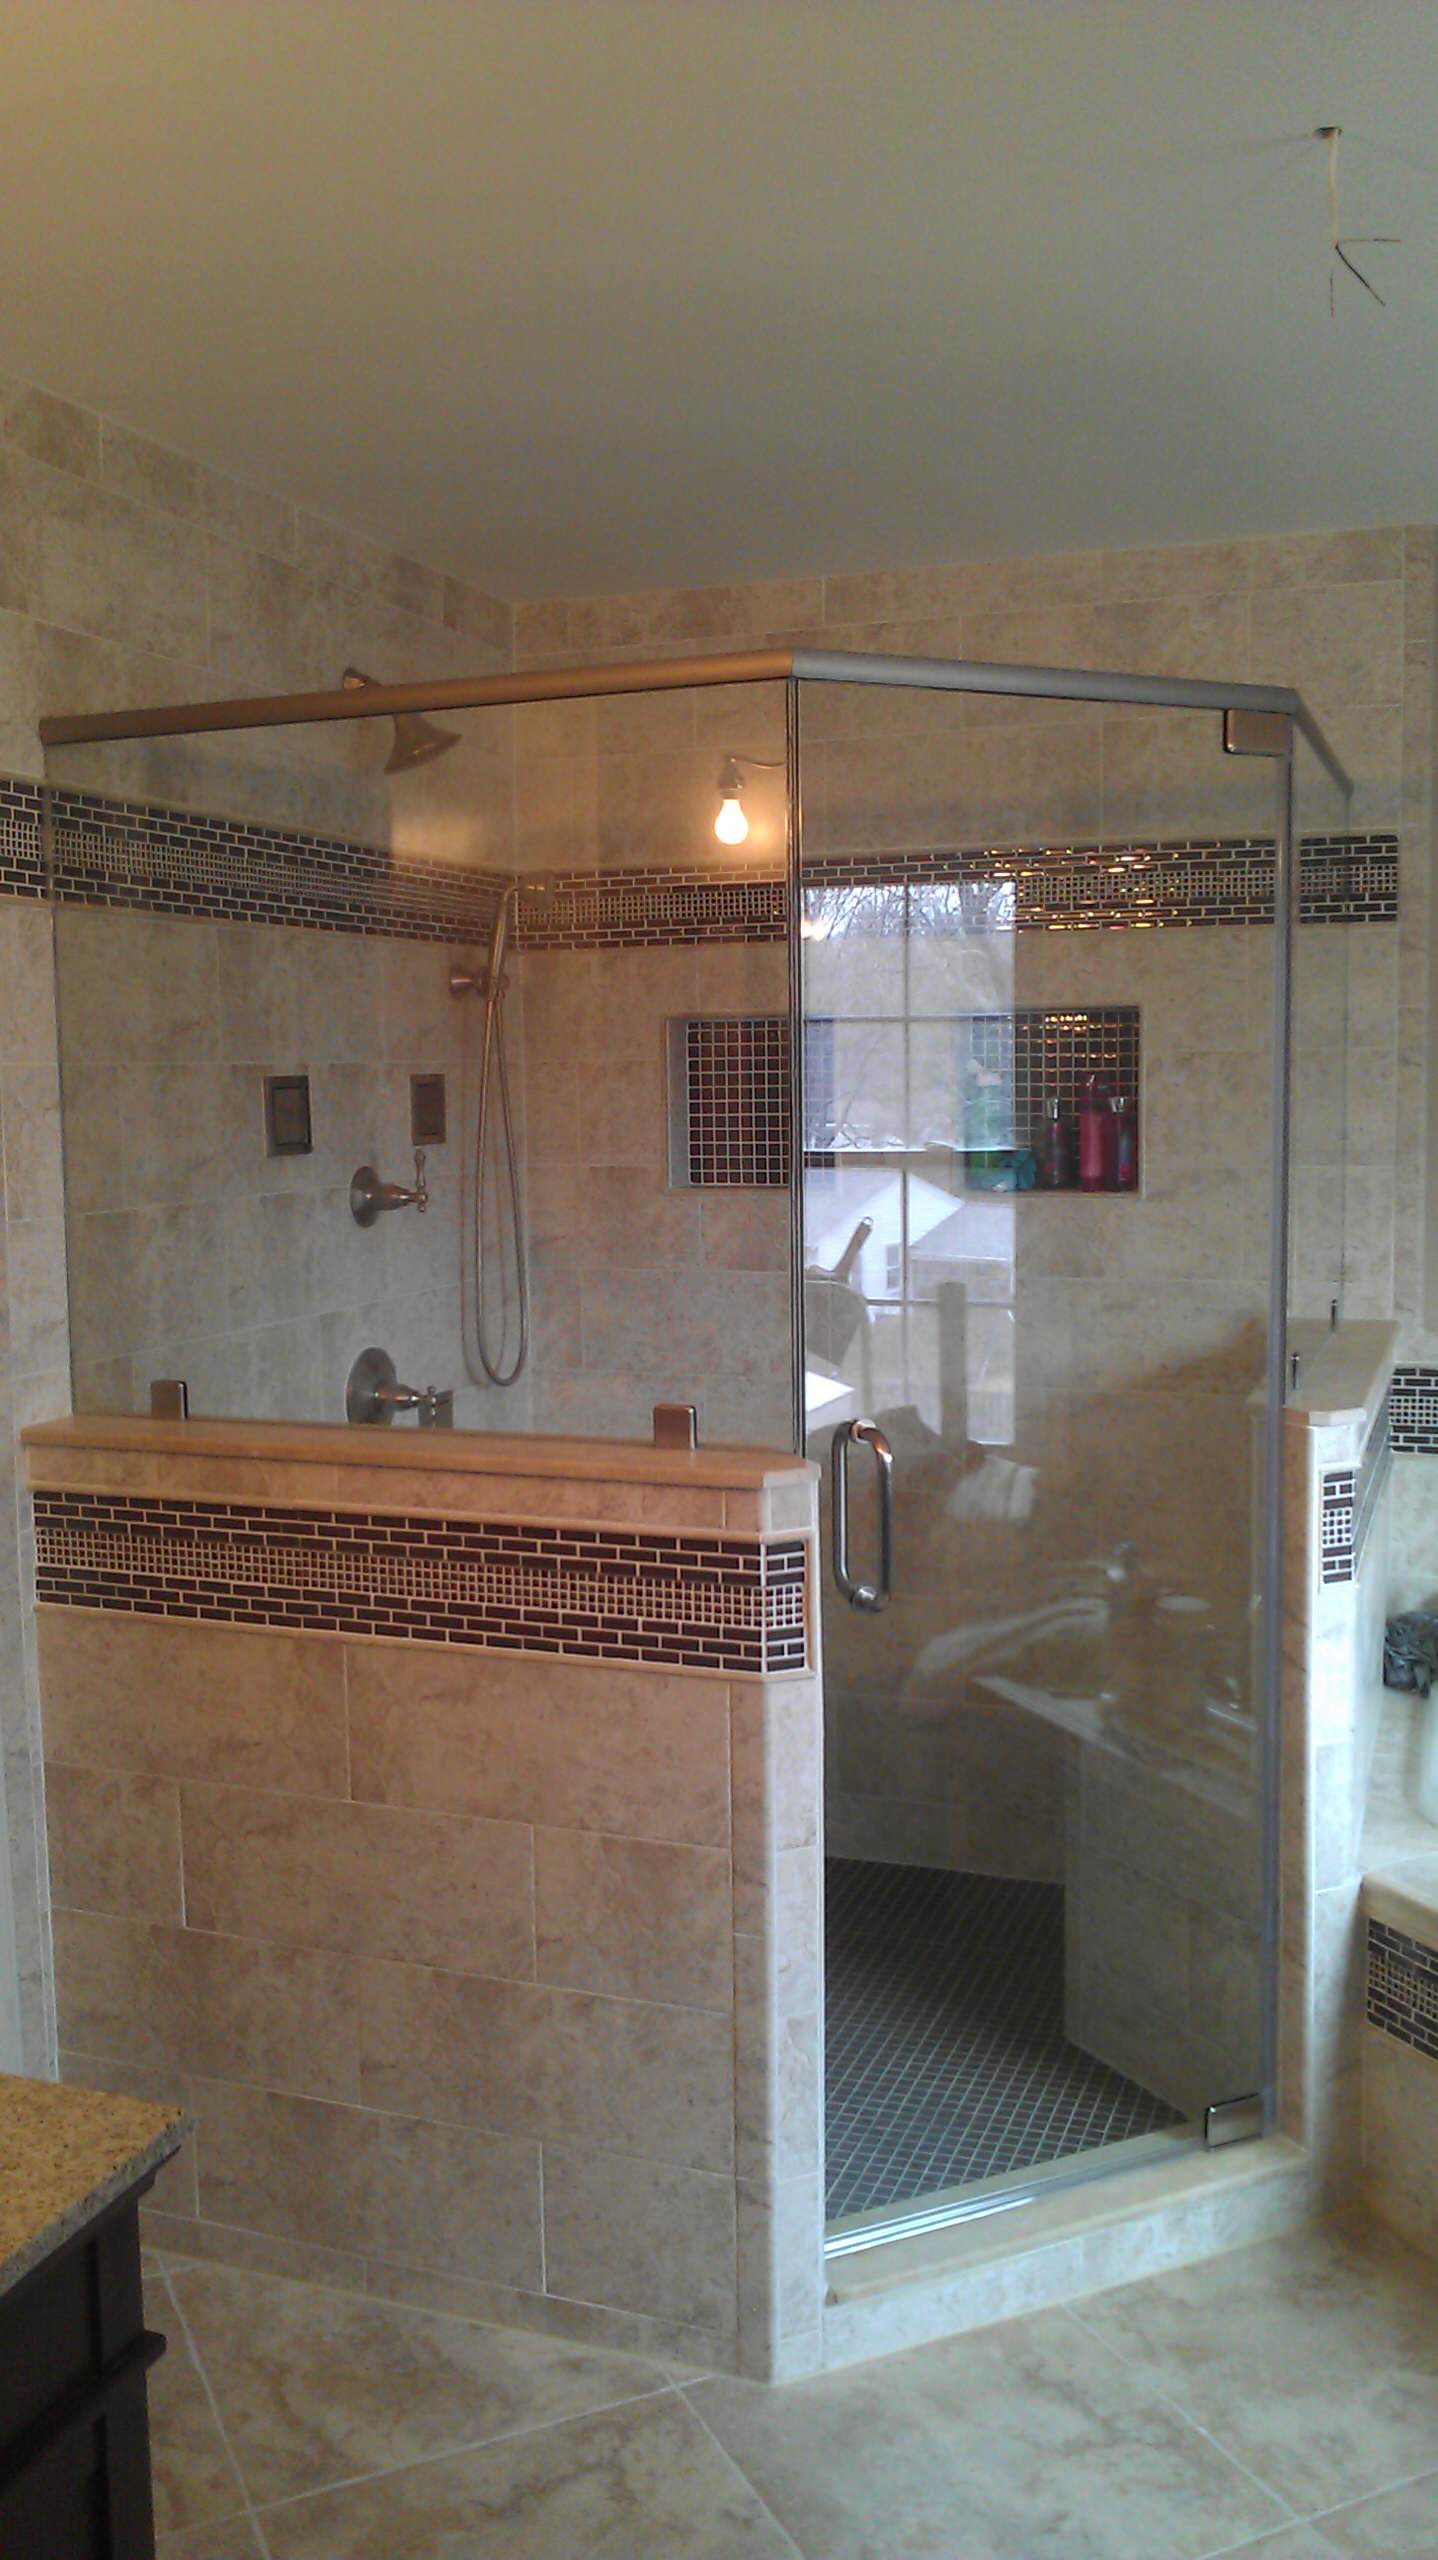 Neo-Angle Corner Showers Are Perfect for Many Bathrooms. Here's Why. - ABC  Glass & Mirror